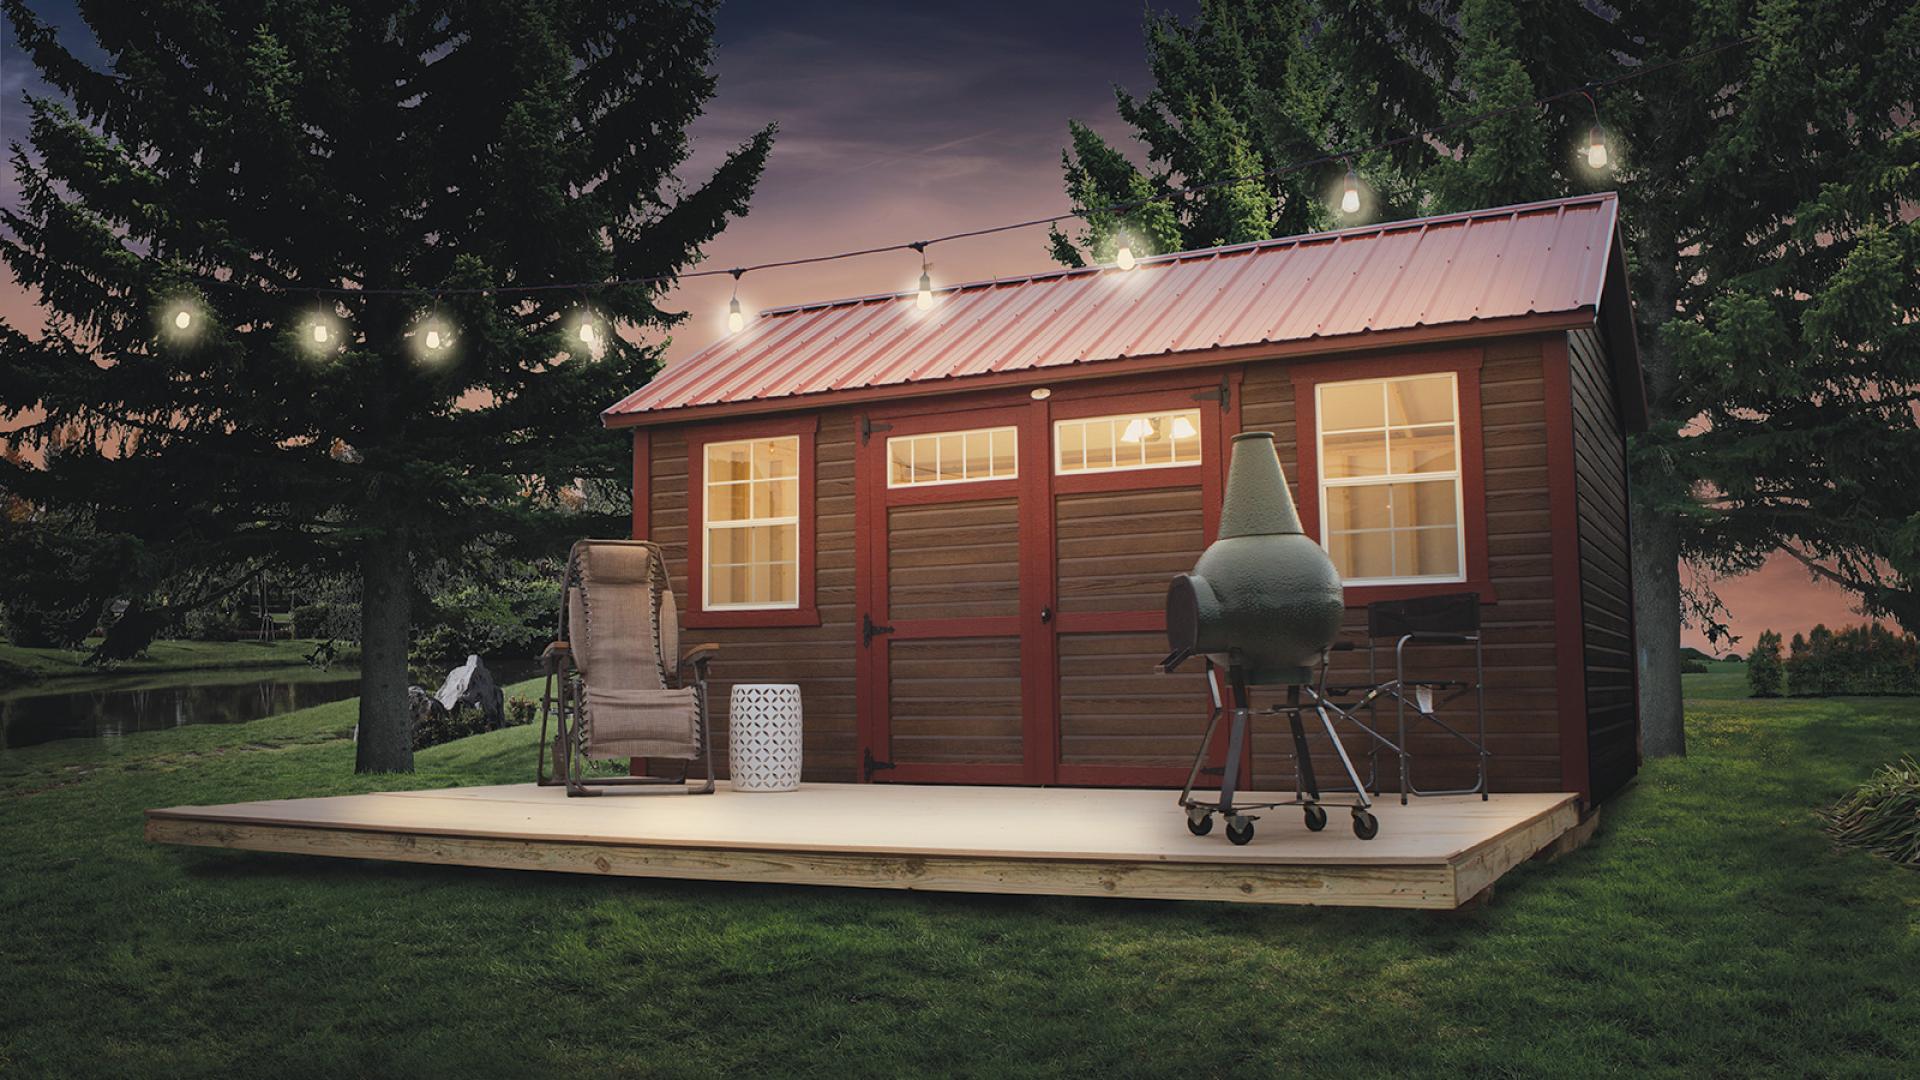 Tiny house made from a garden shed with brown siding, red trim, and red roofing sitting by a river with a porch that has hanging lights, a grill, and outdoor seating.